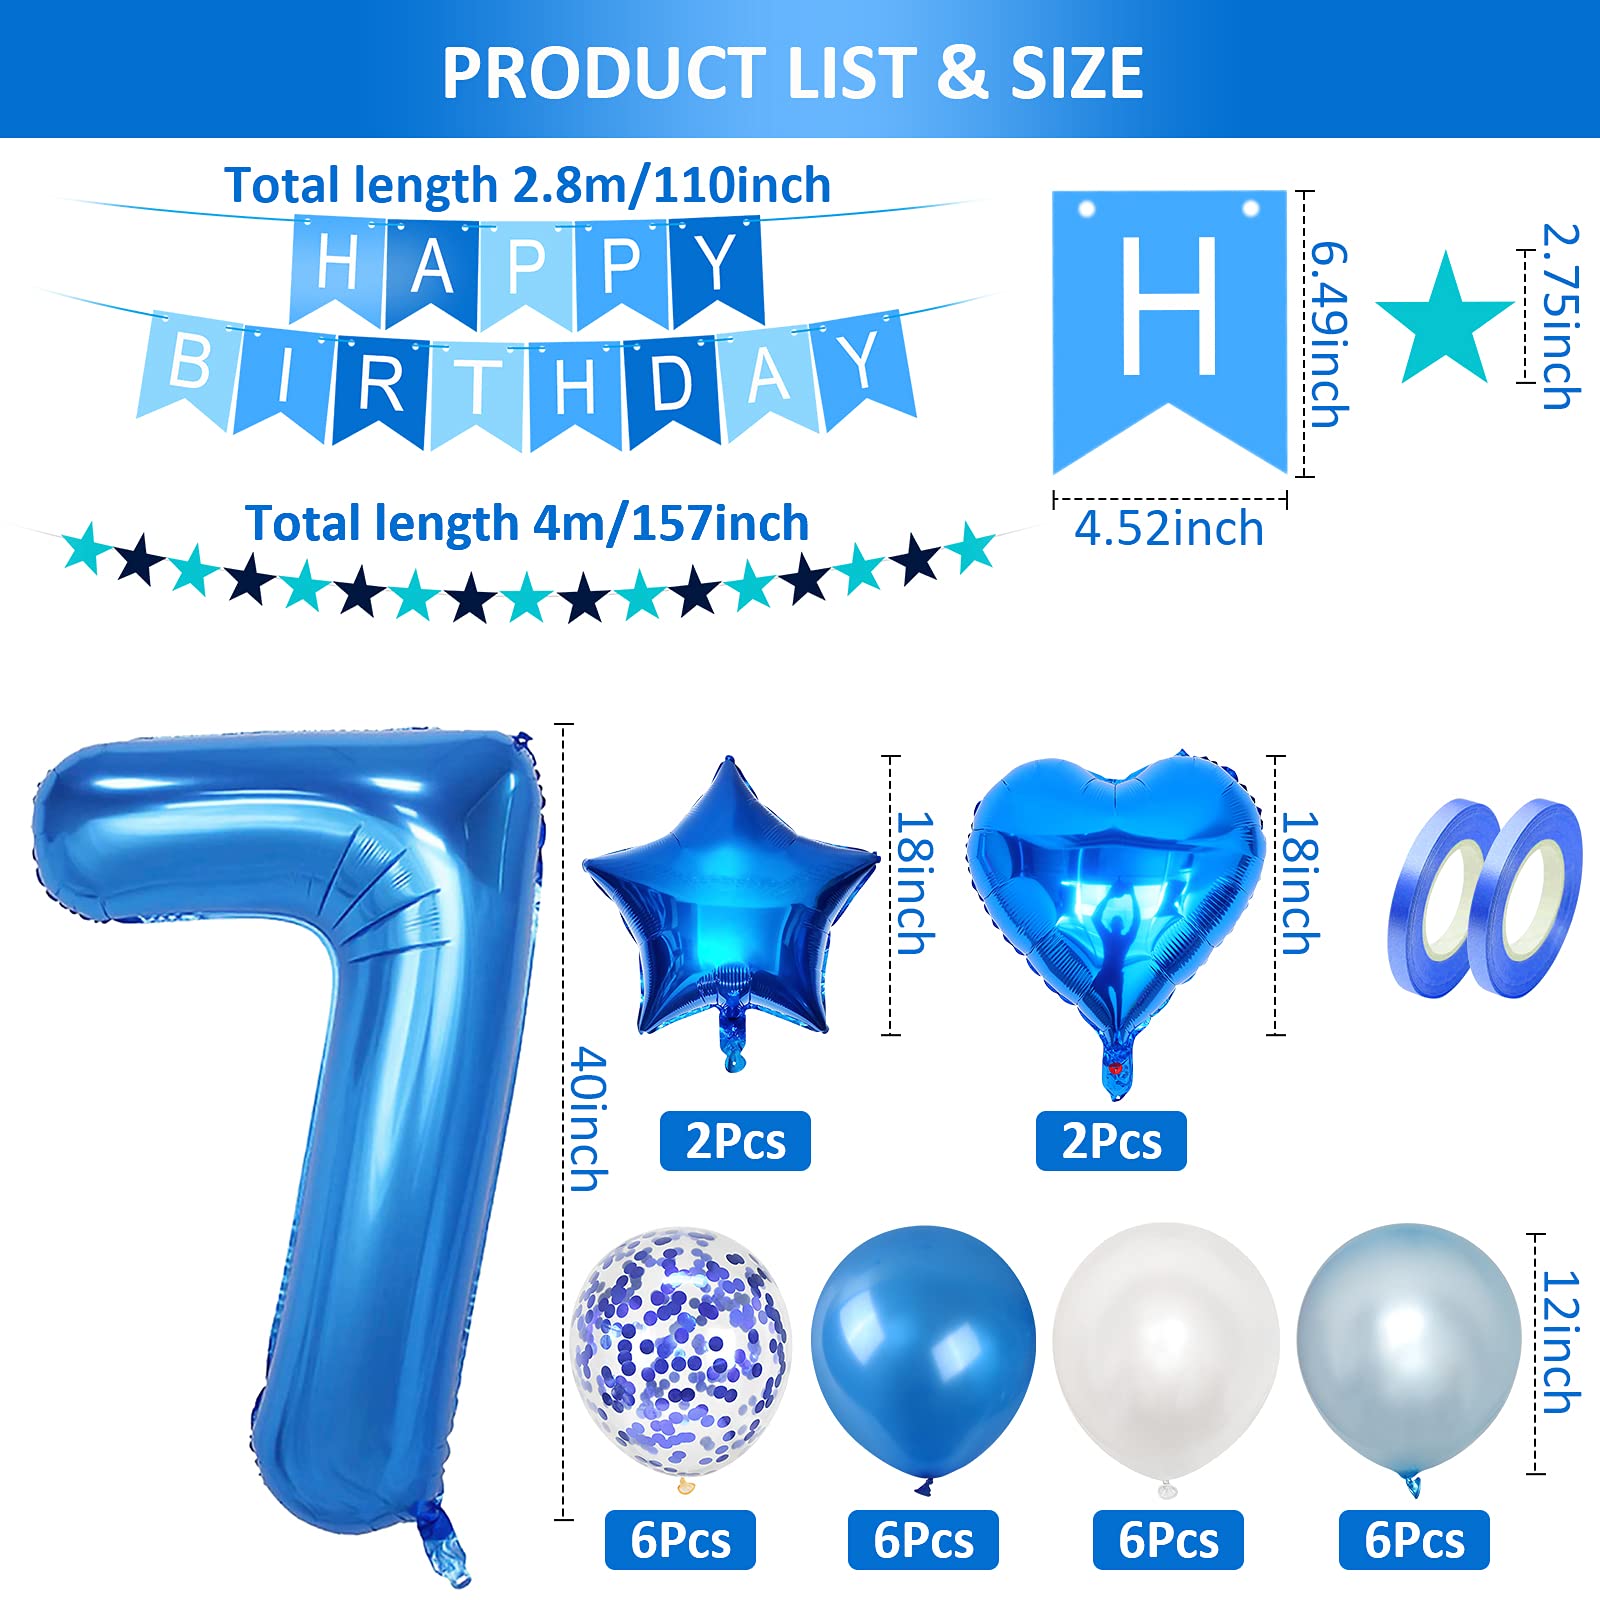 Unisun 7th Birthday Decorations for boy, 40 inch Helium Foil Balloon Number 7 Light Blue White Confetti Latex Balloons, Happy Birthday Banner with Ribbon for 7 Year Kid Birthday Party Supplies